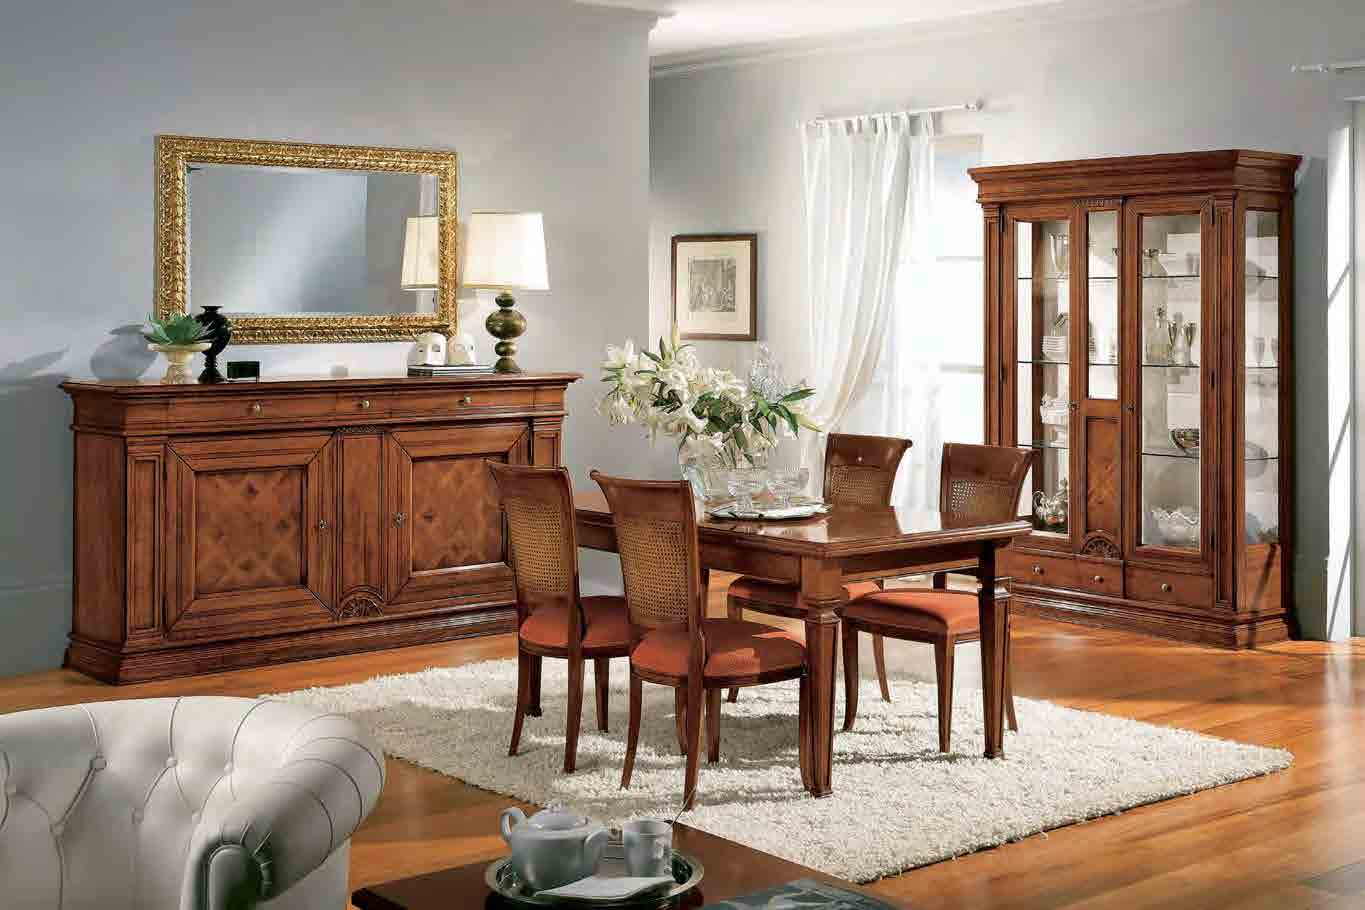 dining rooms ARTICOLO 4045 Credenza con 2 porte intarsiate e 3 cassetti (smontabile). Coffeeboard 2 doors with inlay and 3 drawers (dismantles). cm. L. 224 P. 58 H. 117 M 3 1,52 Kg.